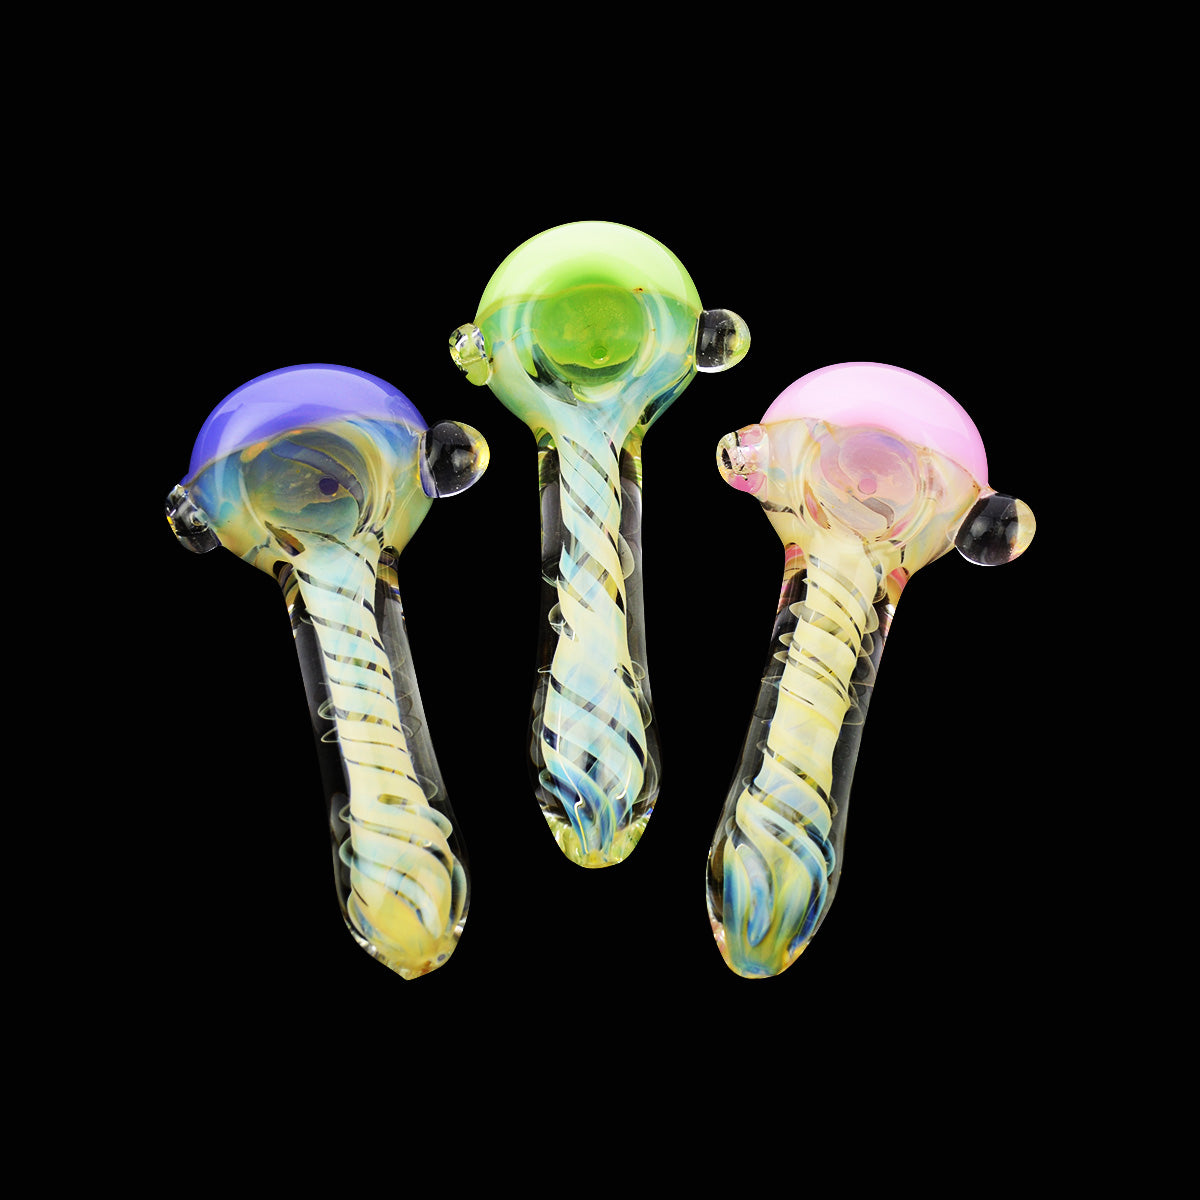 4.5'' American Made Slime Hand PIPE Spoon Silver Fume Glass Twisting Art